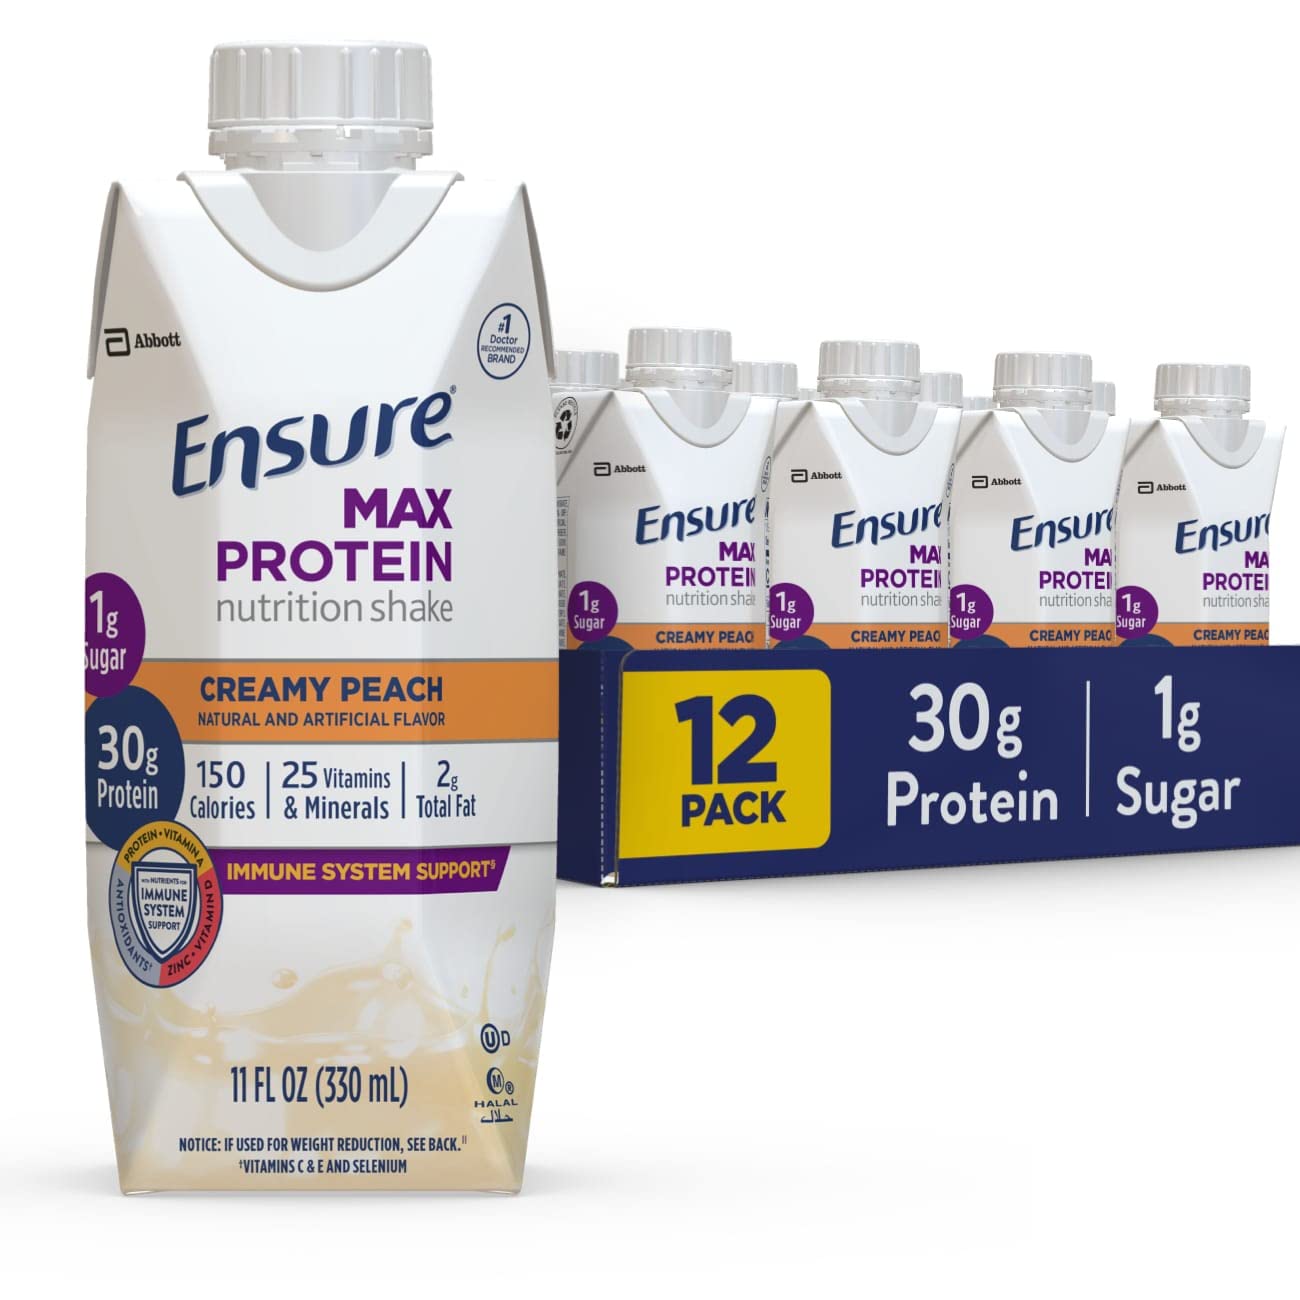 Ensure Max Protein Nutrition Shake, with 30g of Protein, 1g of Sugar, High Protein Shake, Creamy Peach, 11 fl oz - Pack of 12